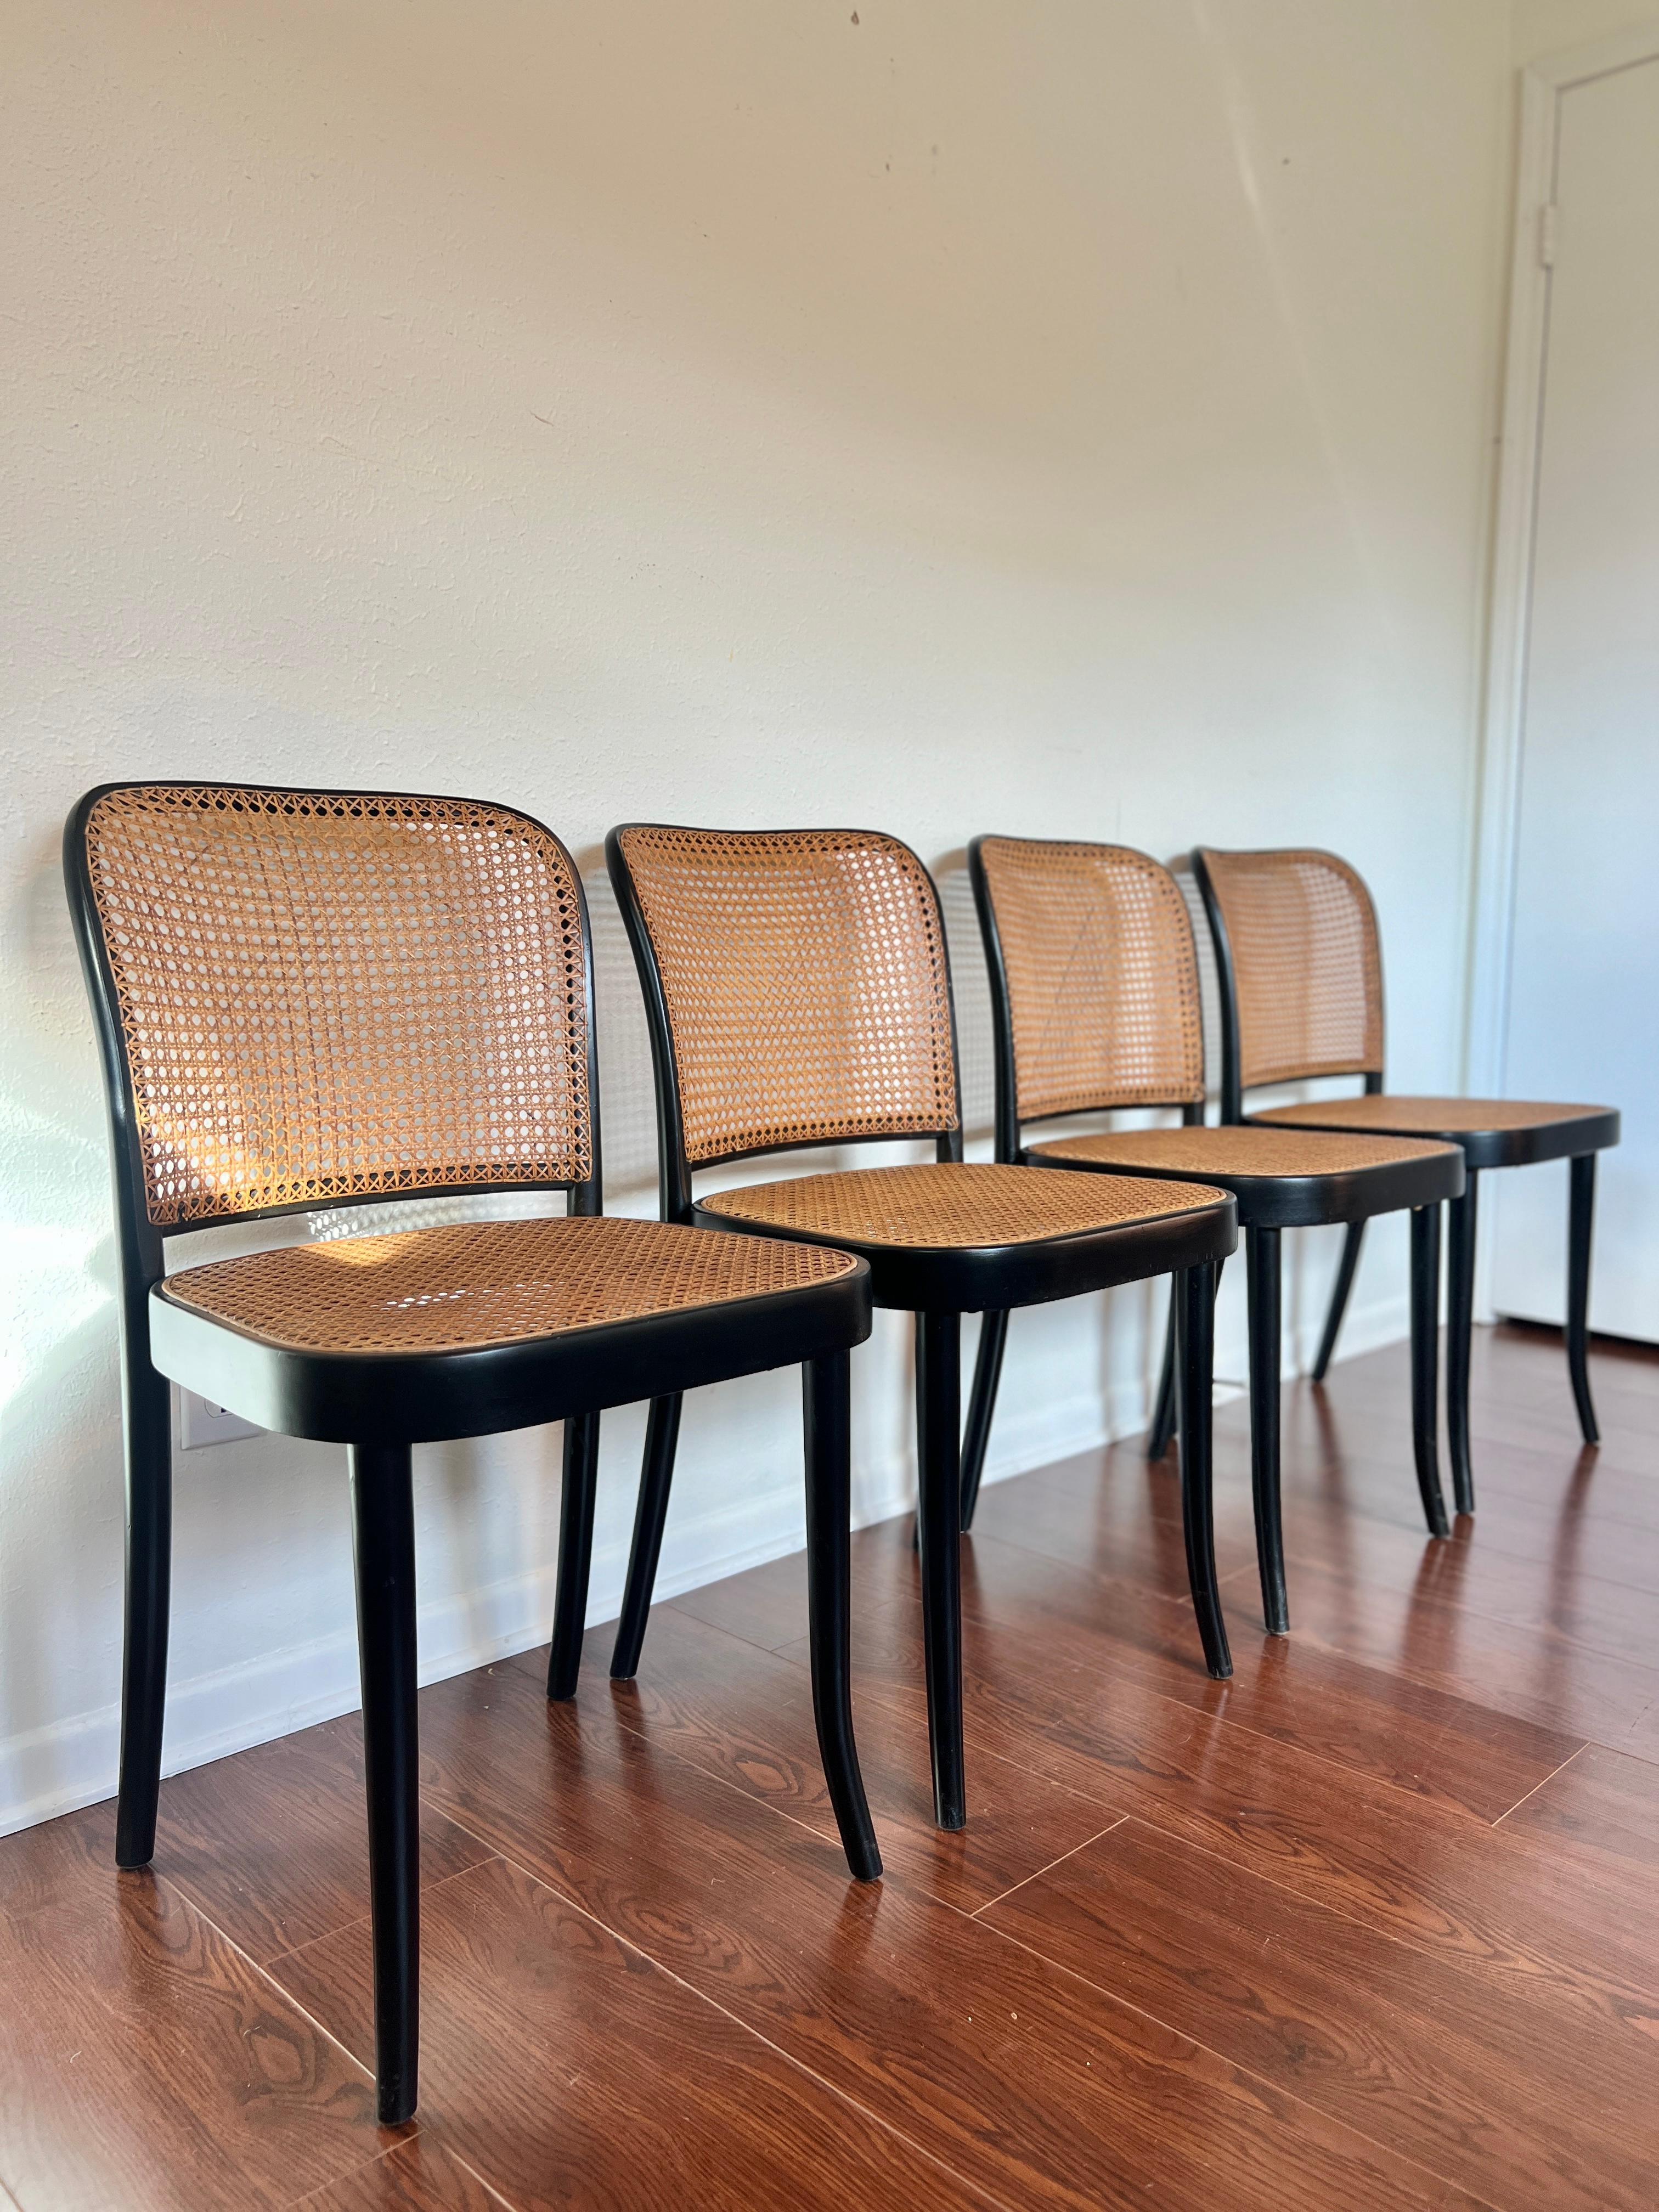 Mid-20th Century A set of of 4 original chairs by Josef Hoffmann for Thonet, circa 1960s